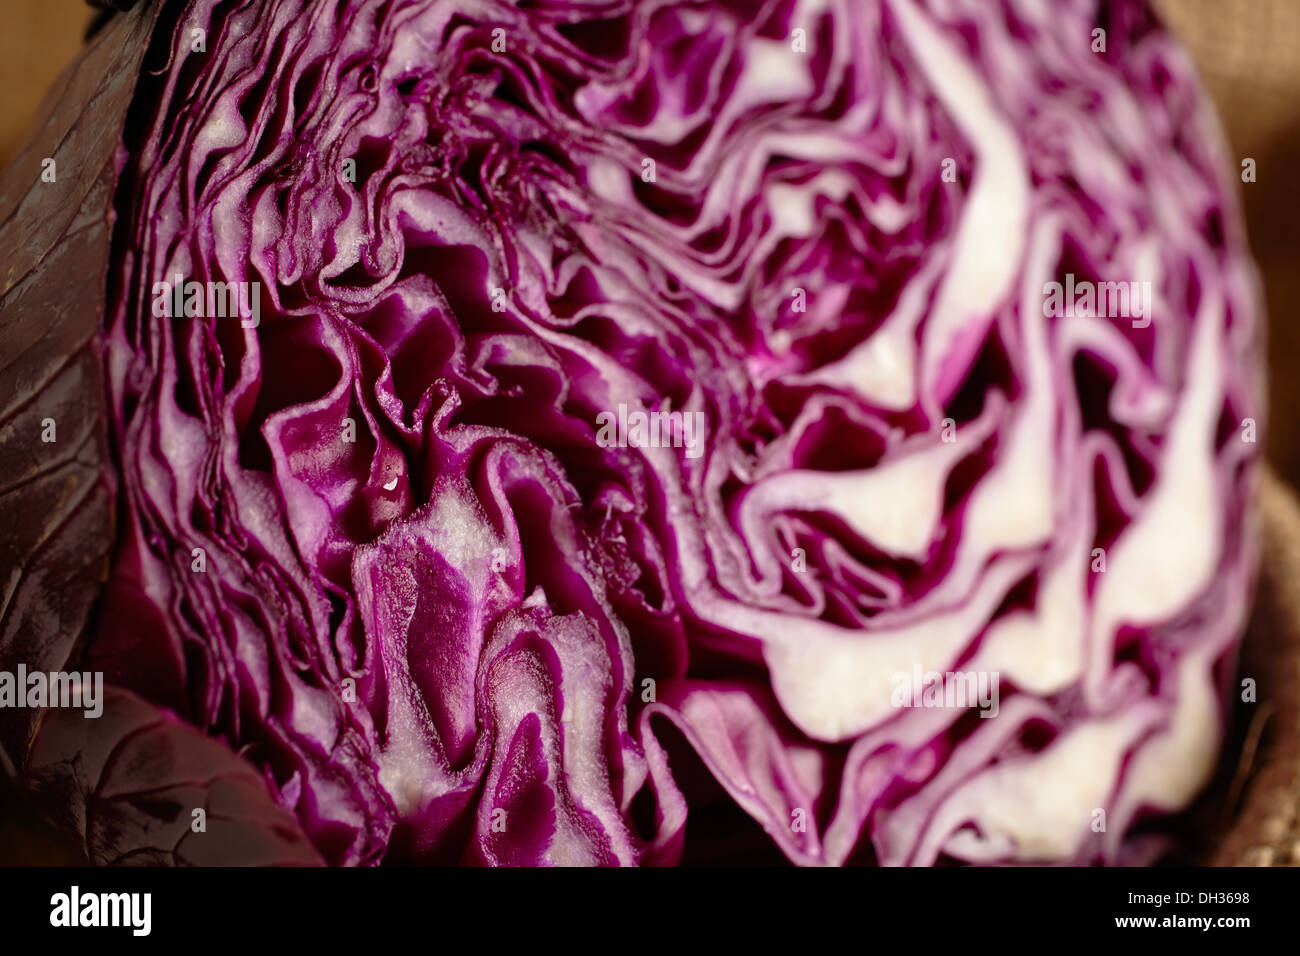 Red cabbage cut in half Stock Photo